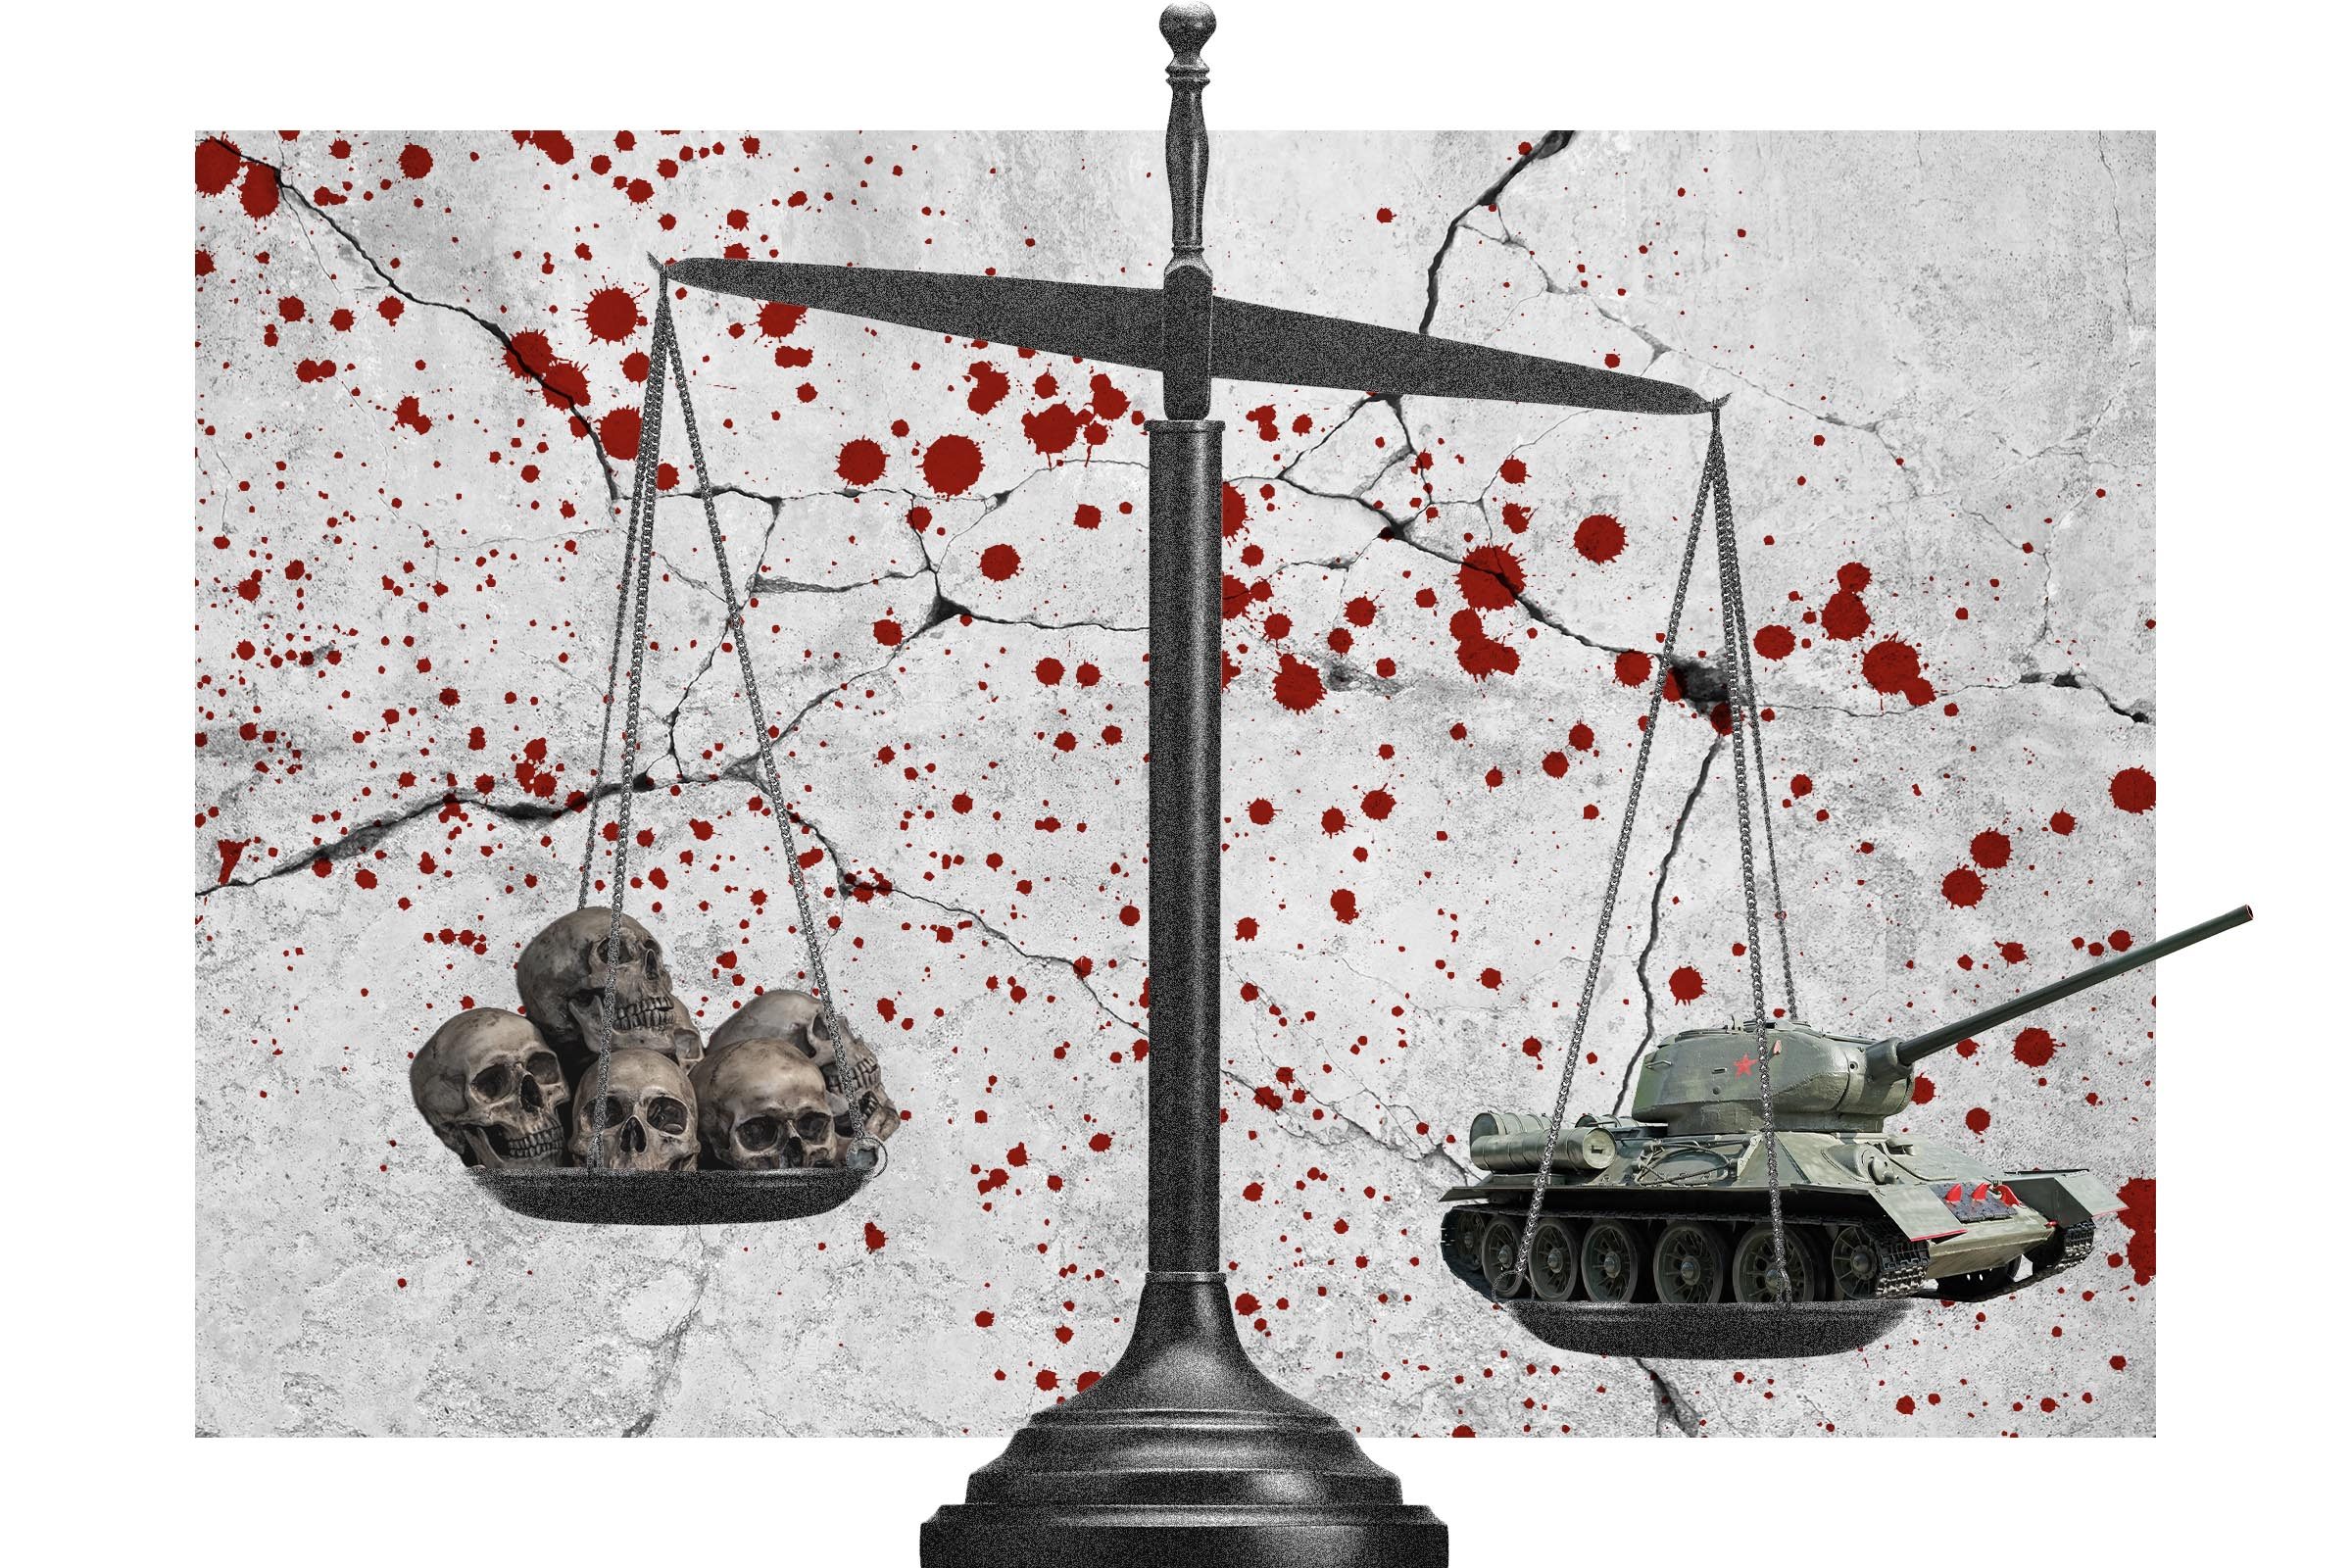 Collage of a justice scale holding skulls and a military tank with blood splatters